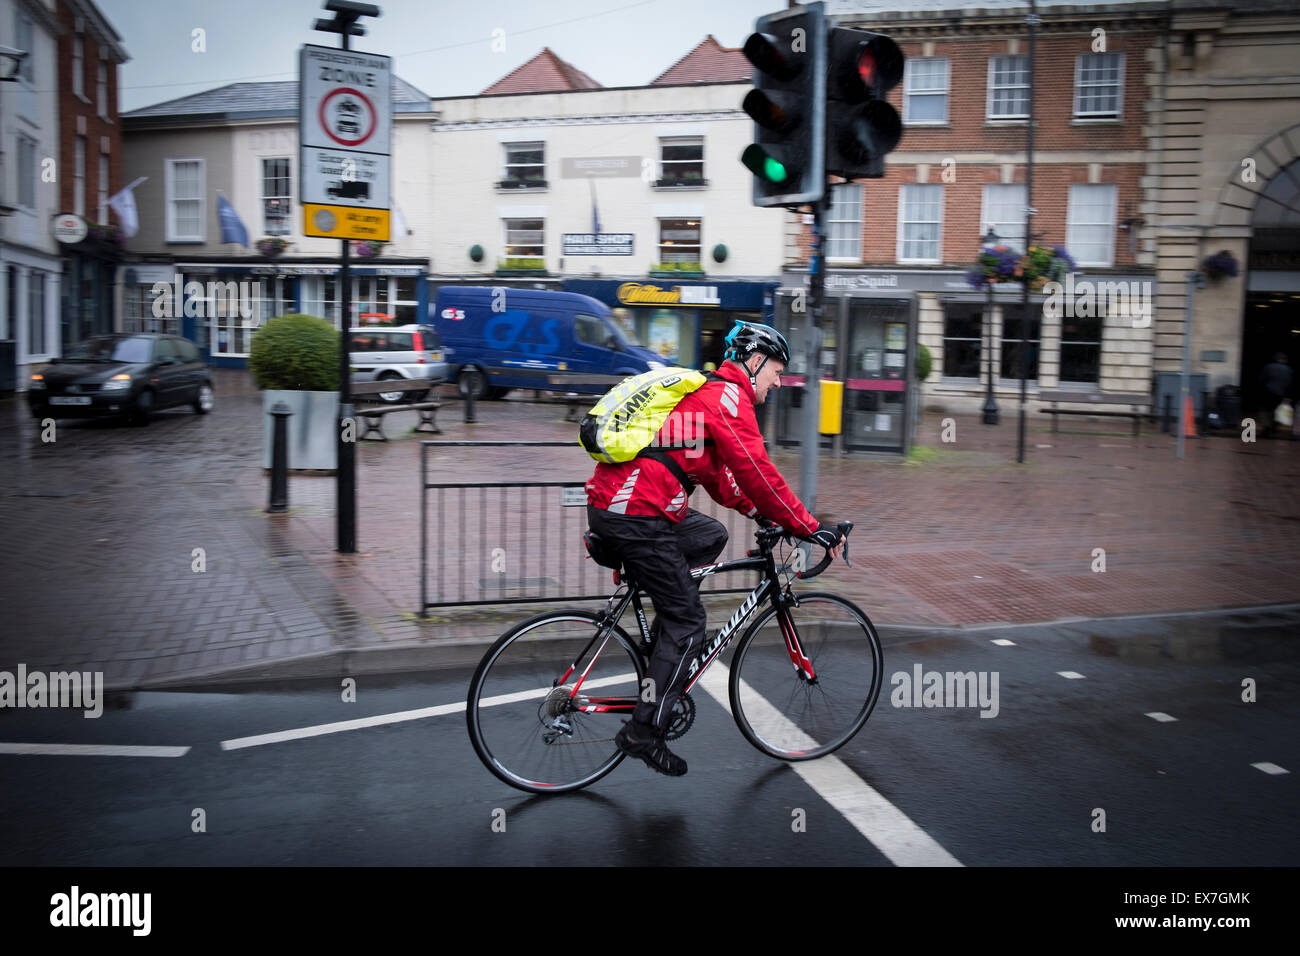 Cycling in city of Salisbury on a wet day Stock Photo